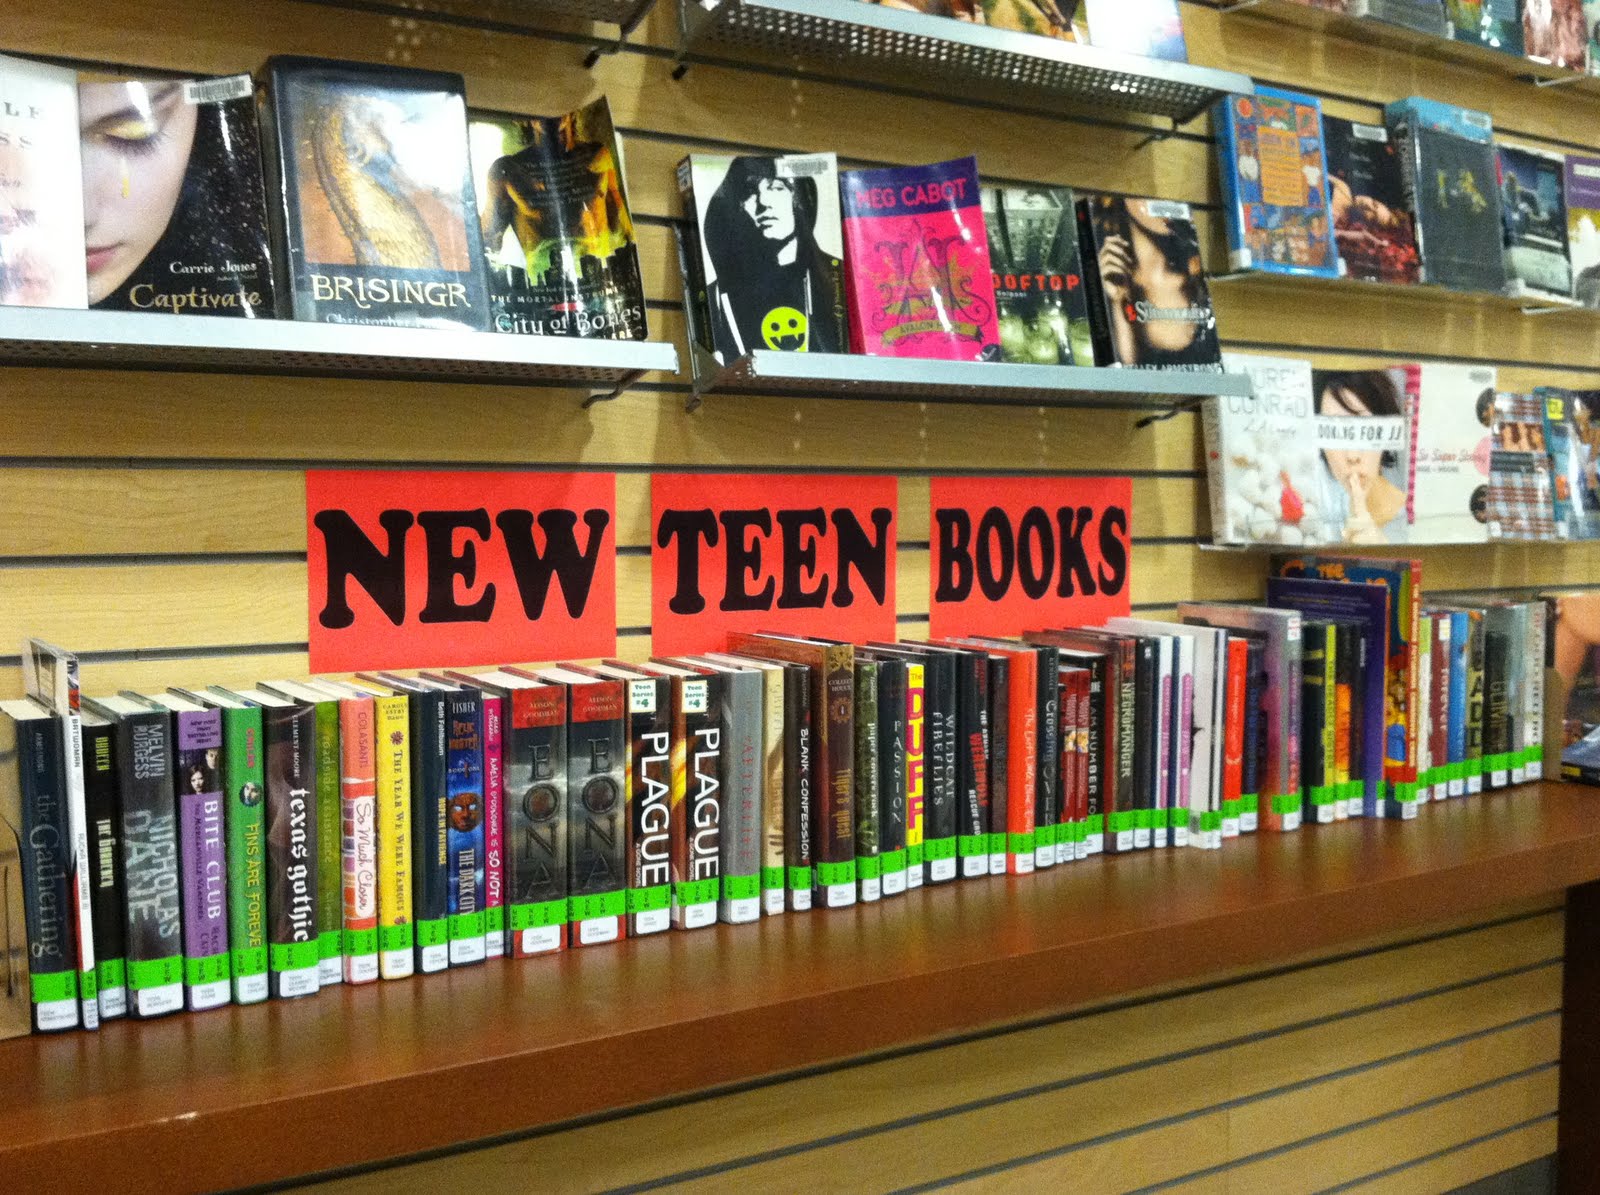 Books for teens.